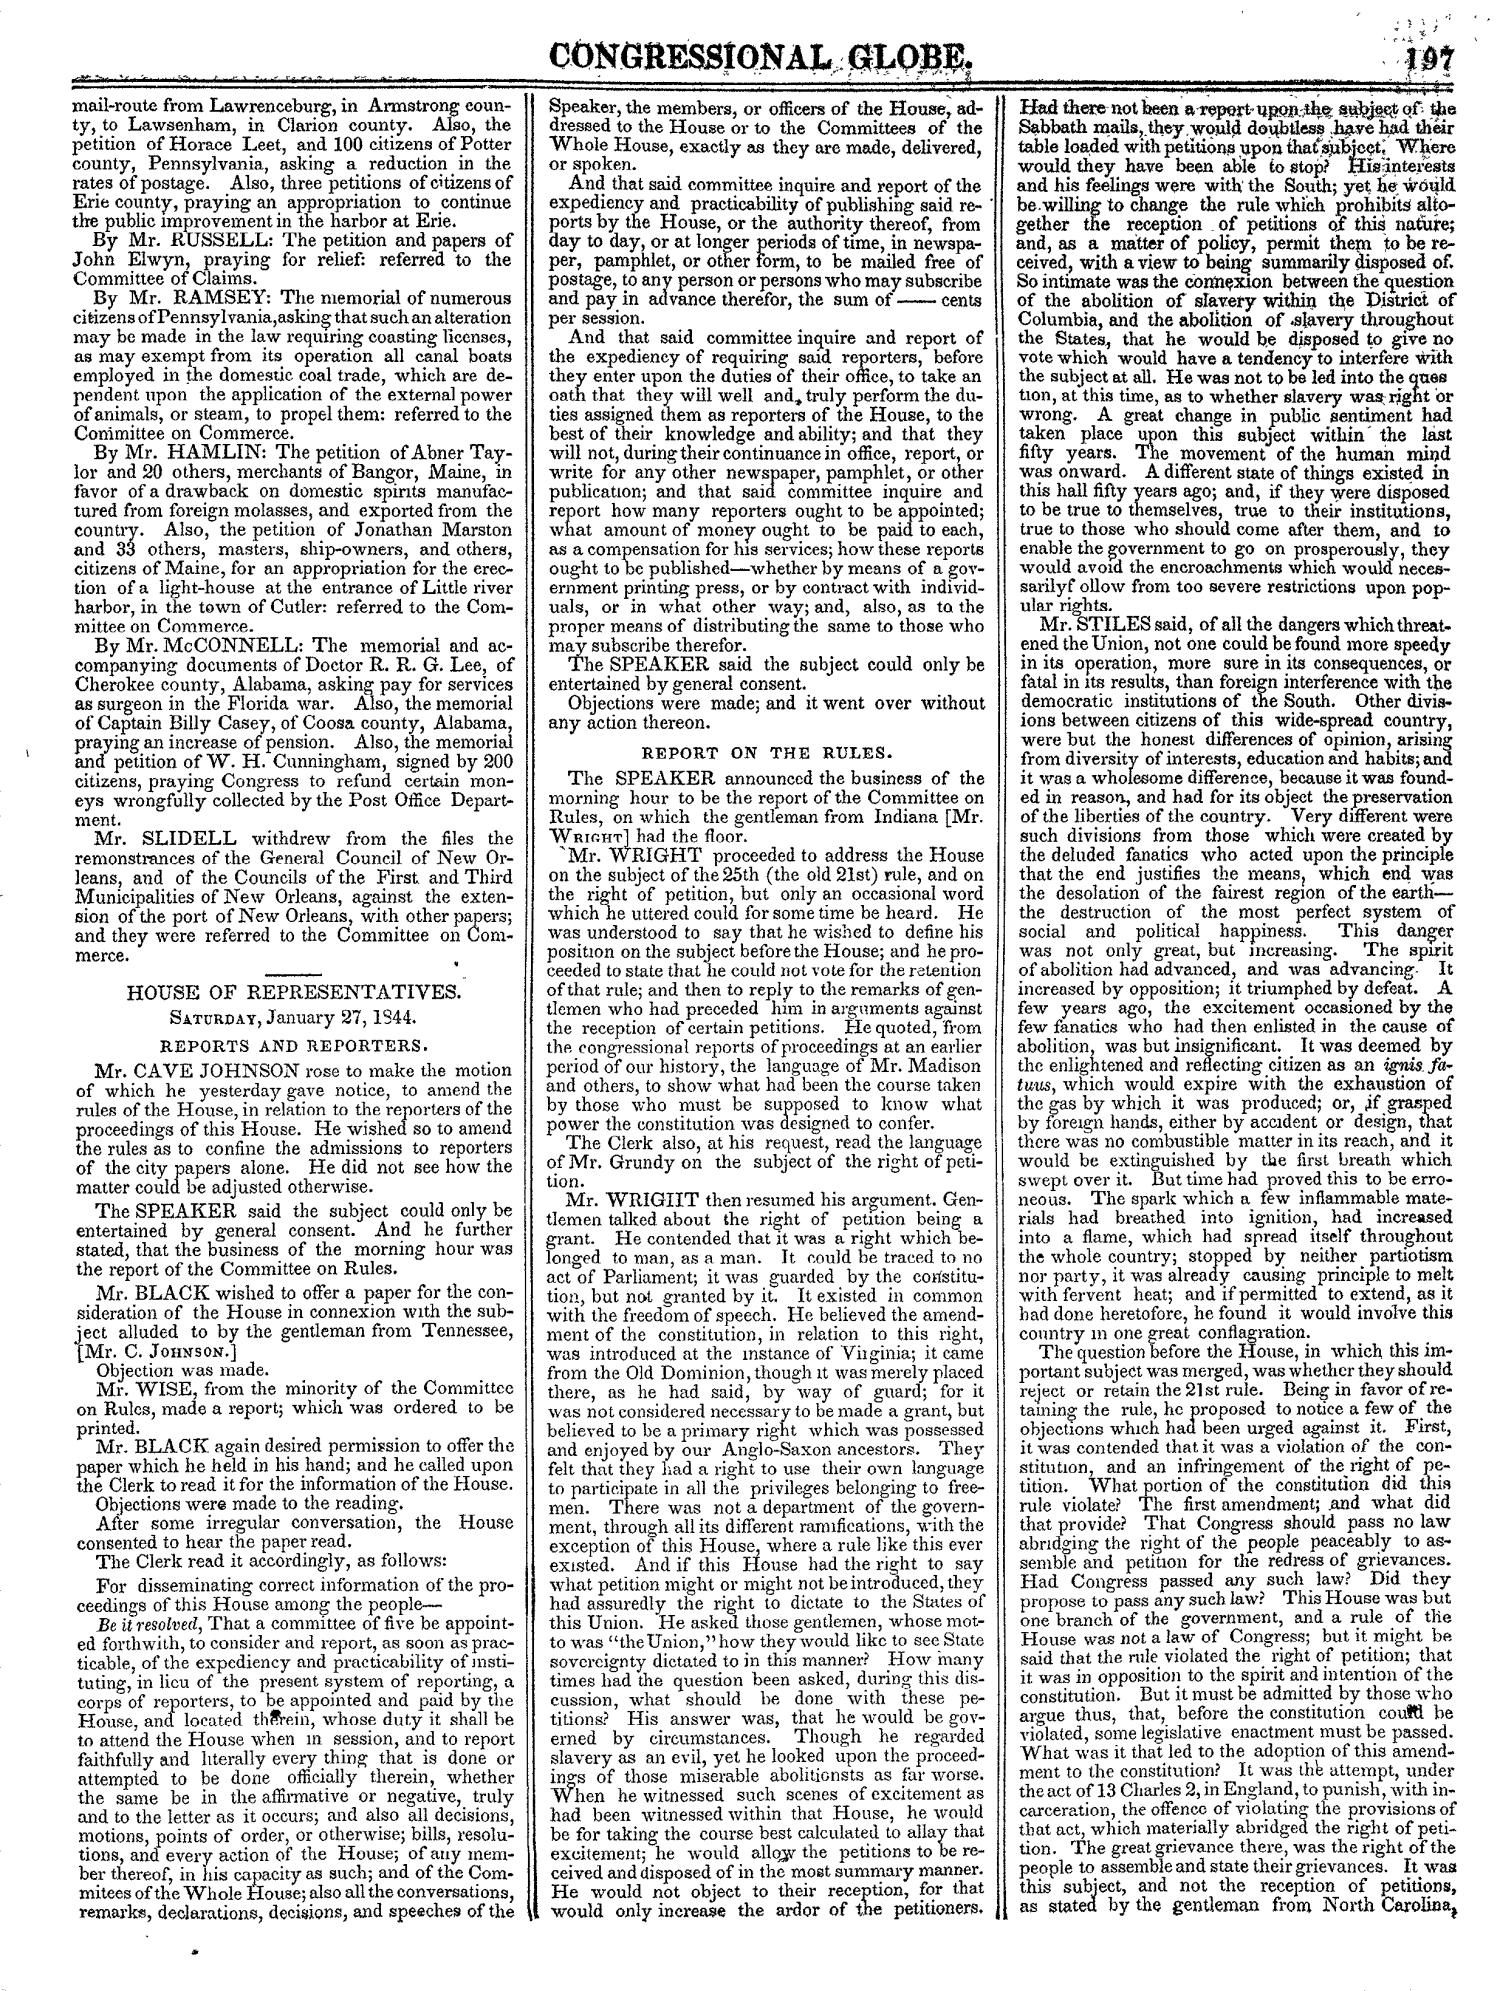 The Congressional Globe, Volume 13, Part 1: Twenty-Eighth Congress, First Session
                                                
                                                    197
                                                